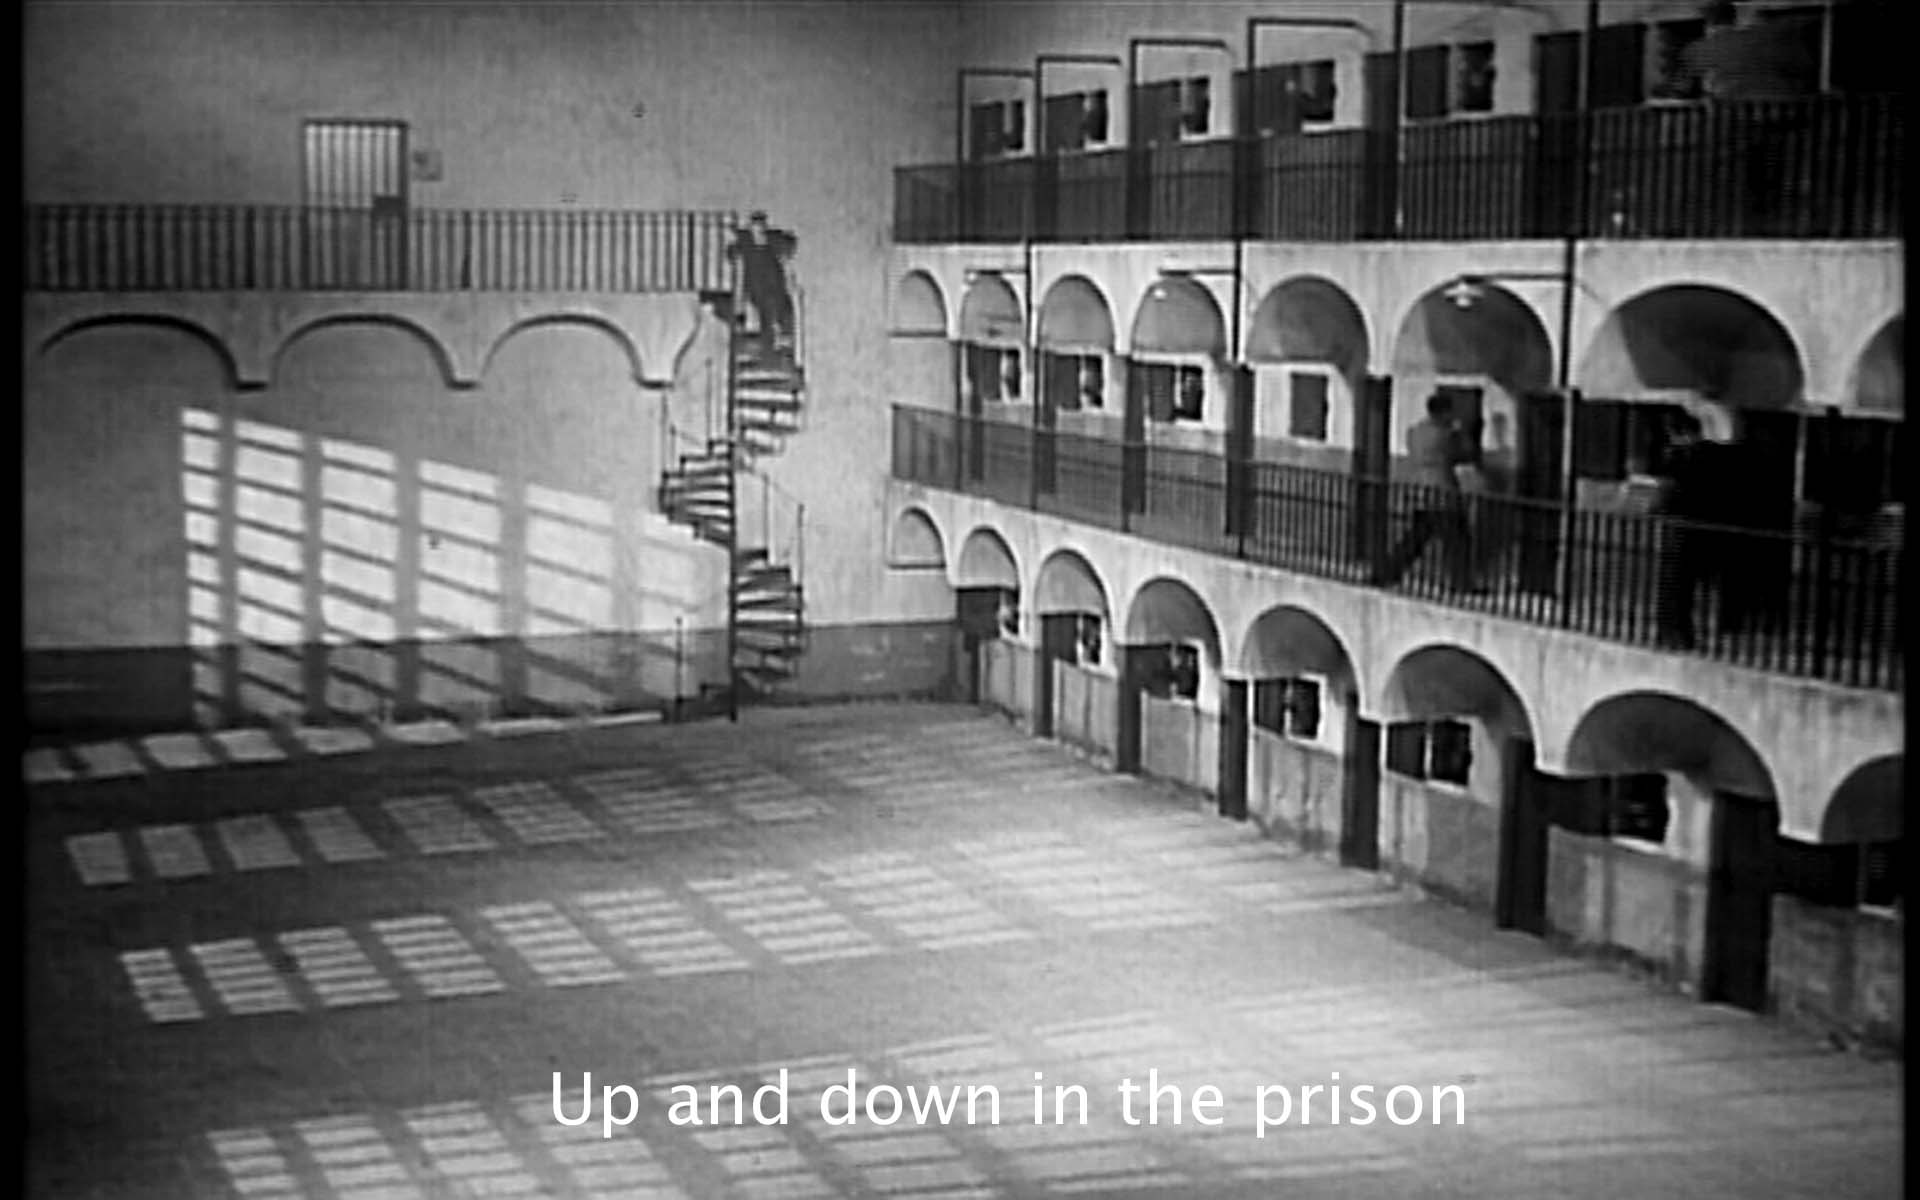 Up and down in the prison